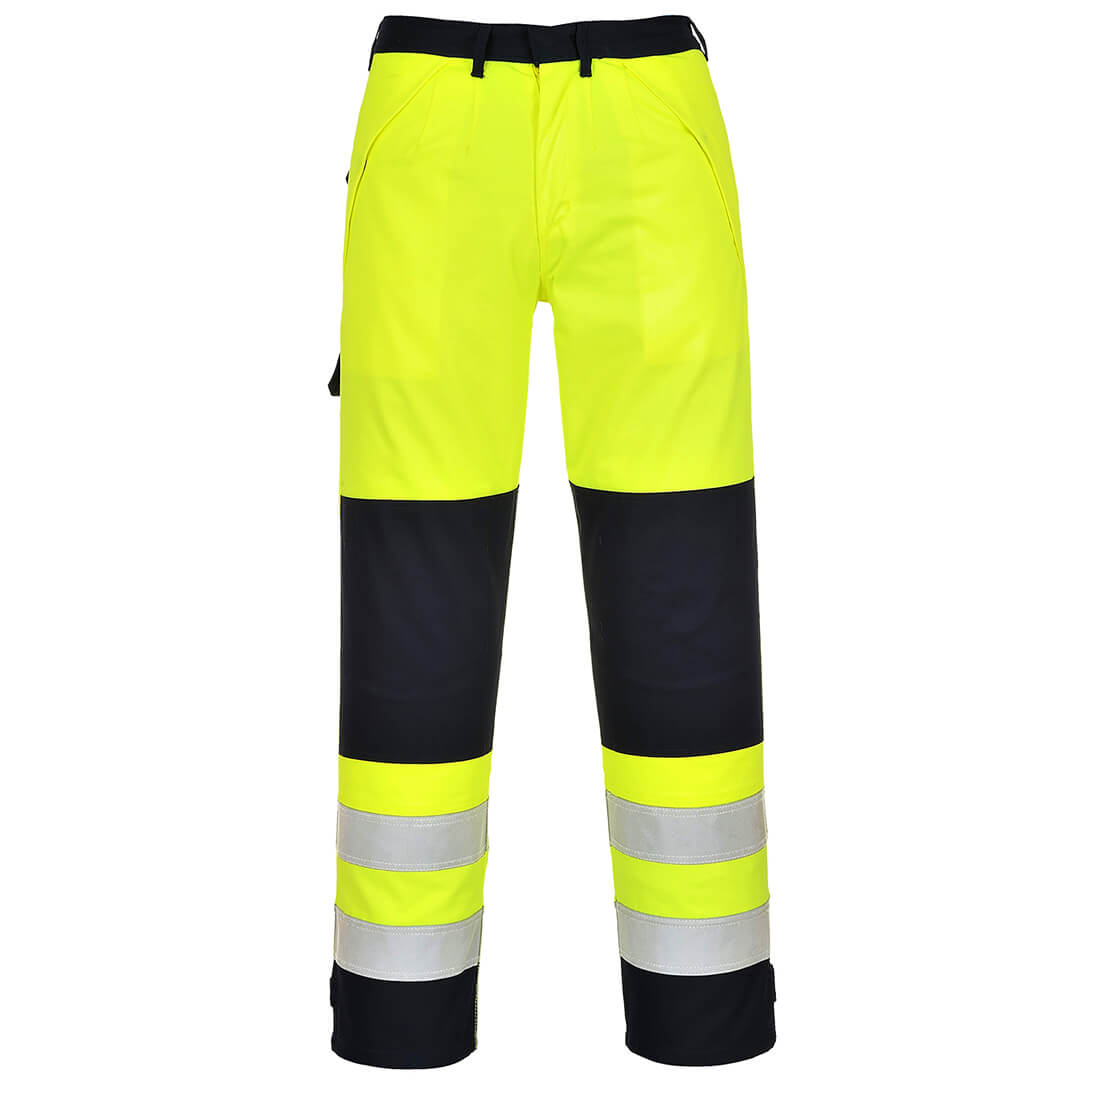 Image of Biz Flame Hi Vis Multi-Norm Flame Resistant Trousers Yellow / Navy M